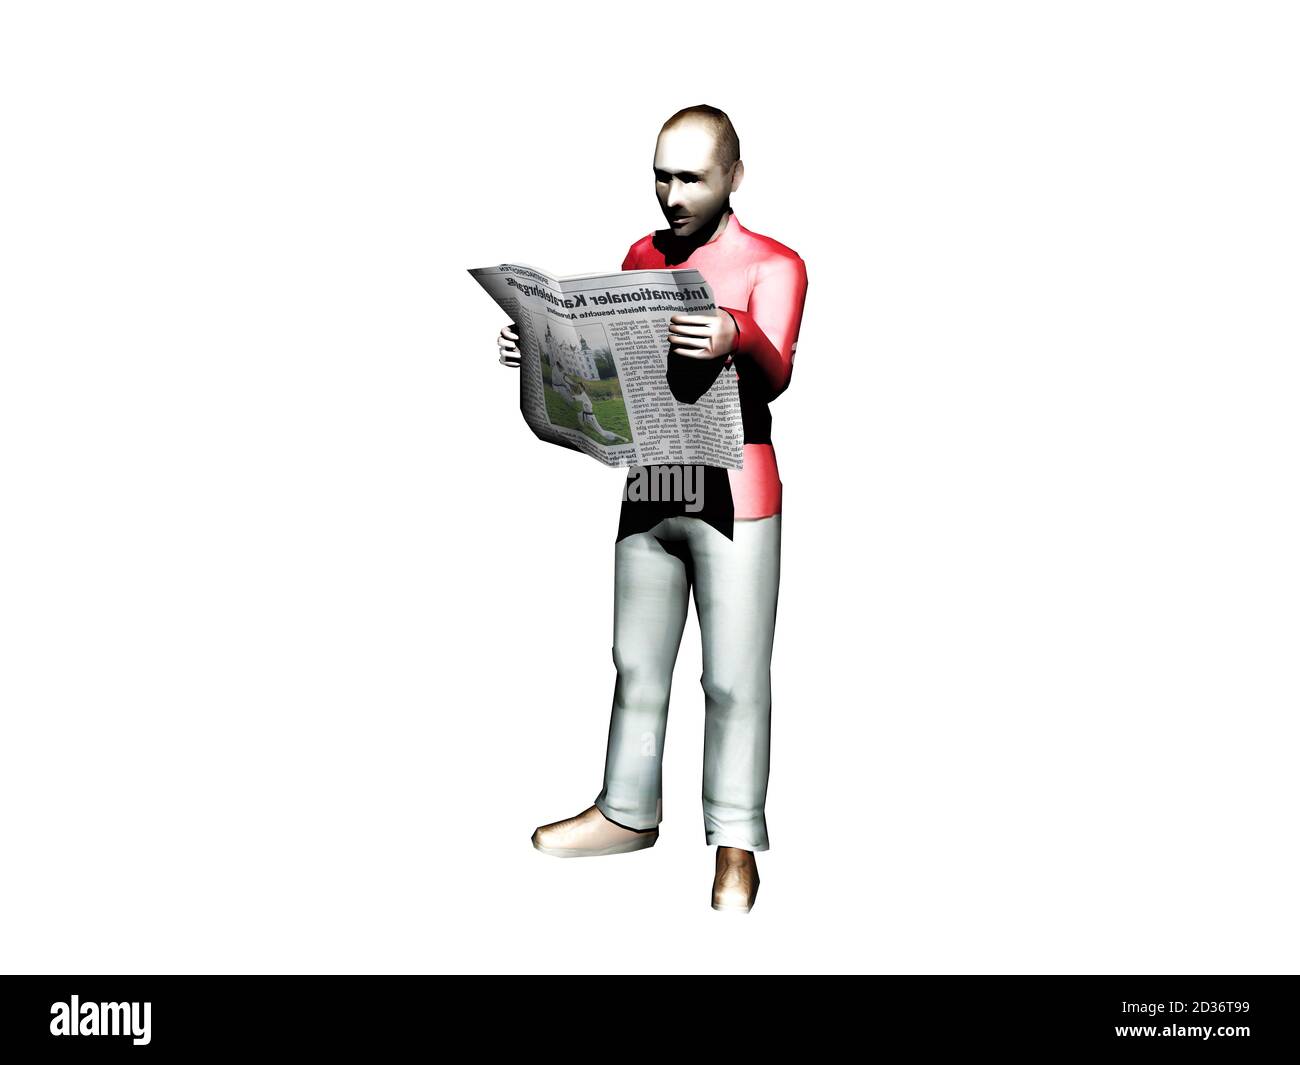 young man reading newspaper while standing Stock Photo